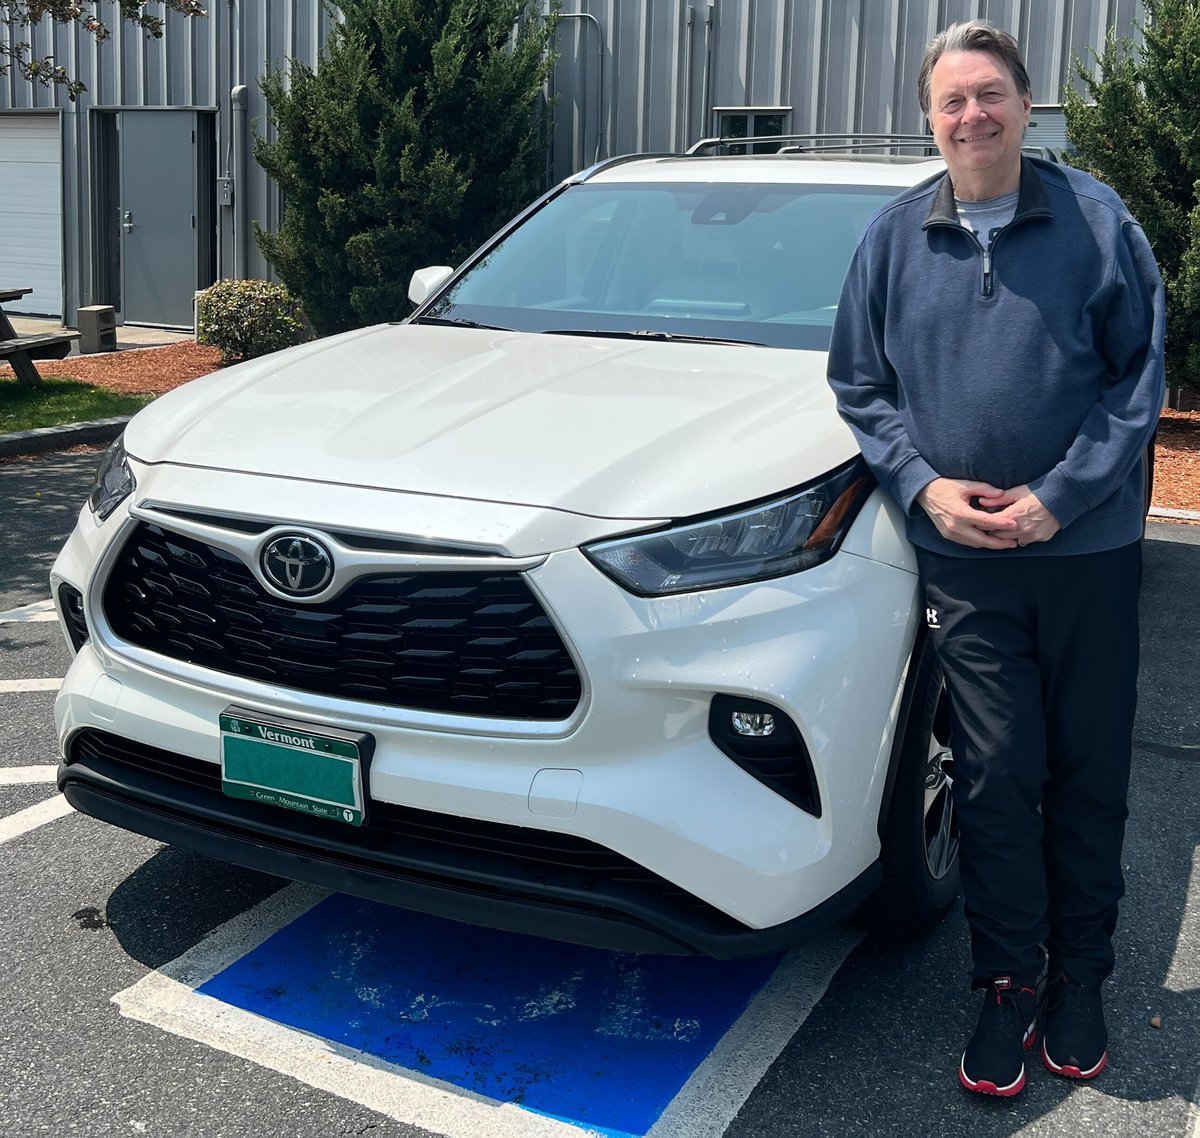 Happy #NewCarDay to Frank! He is now the proud owner of this decked out 2020 @Toyota Highlander XLE he picked out with some help from Cole Ward - Congrats!

Learn more about Cole & check out his reviews on @DealerRater: bit.ly/3lMz8C3

#RollWithCole #Toyota #LetsGoPlaces